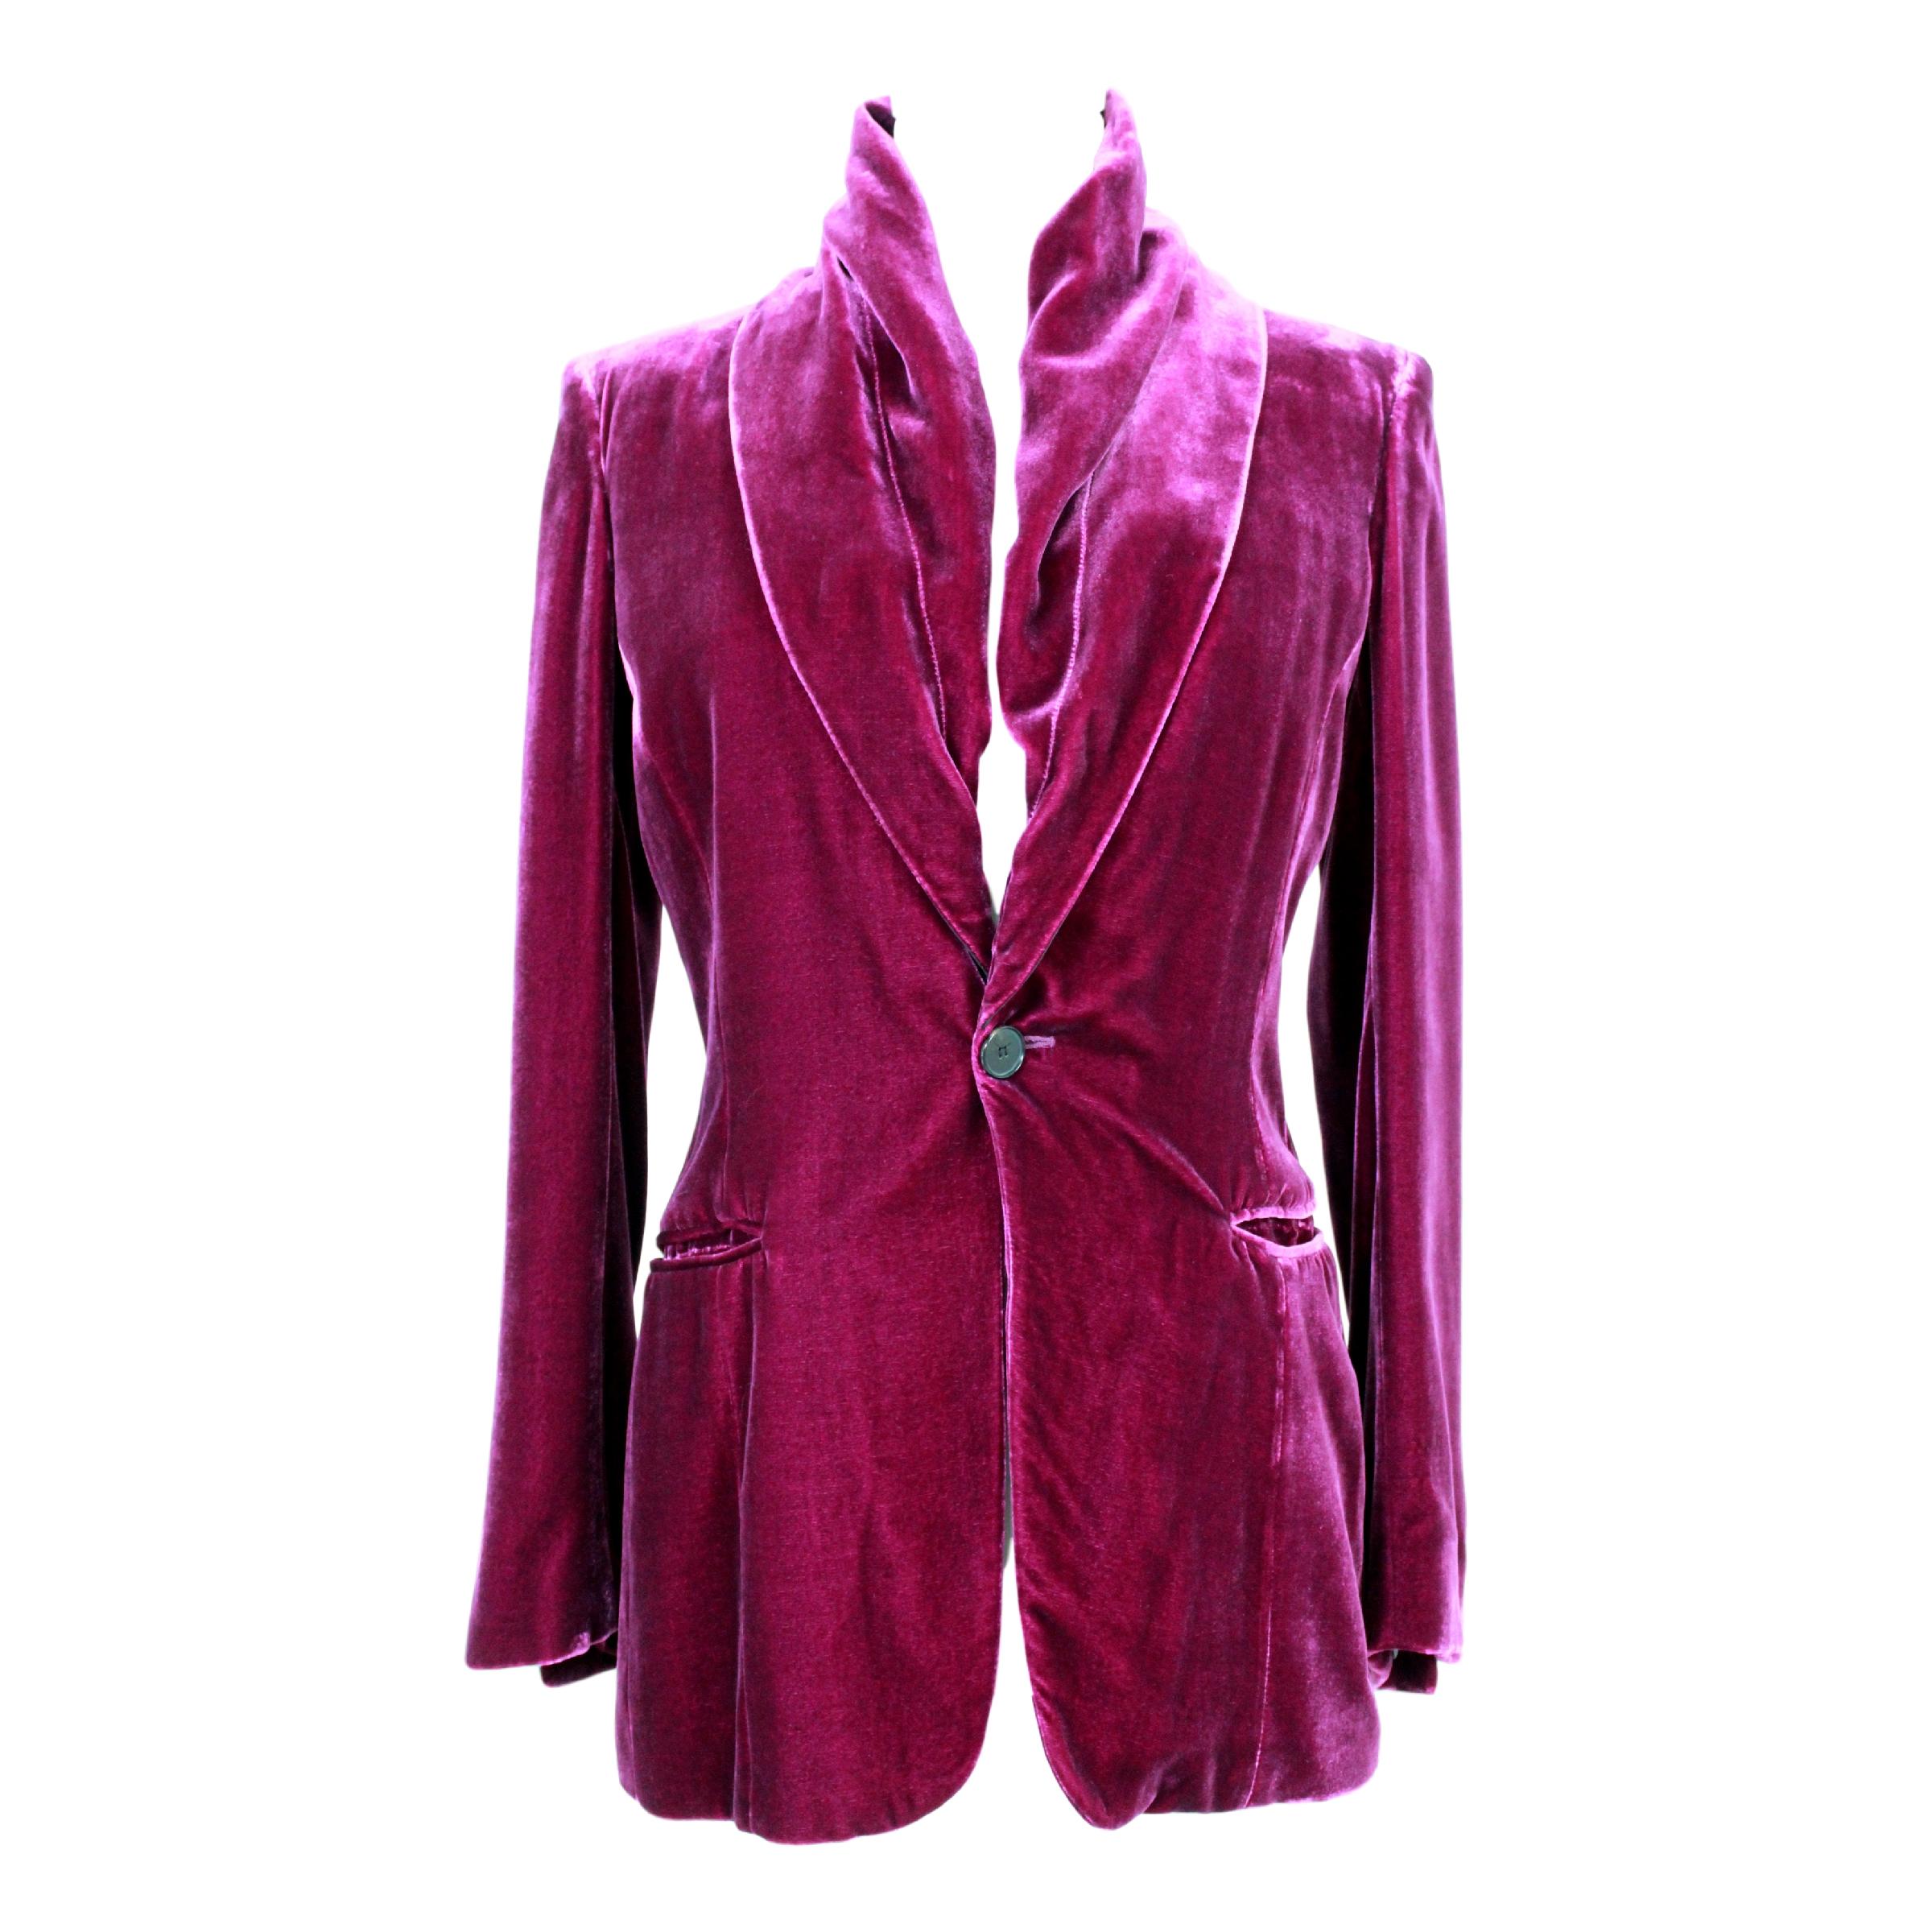 Jean Paul Gaultier Femme women's vintage jacket. Wide shawl collar, purple, 17% silk 83% rayon. Velvety fabric, lined interior. 1990s. Made in Italy. Excellent vintage condition. 

Size: 42 It 8 Us 10 Uk 

Shoulder: 42 cm 
Bust/Chest: 48 cm 
Sleeve: